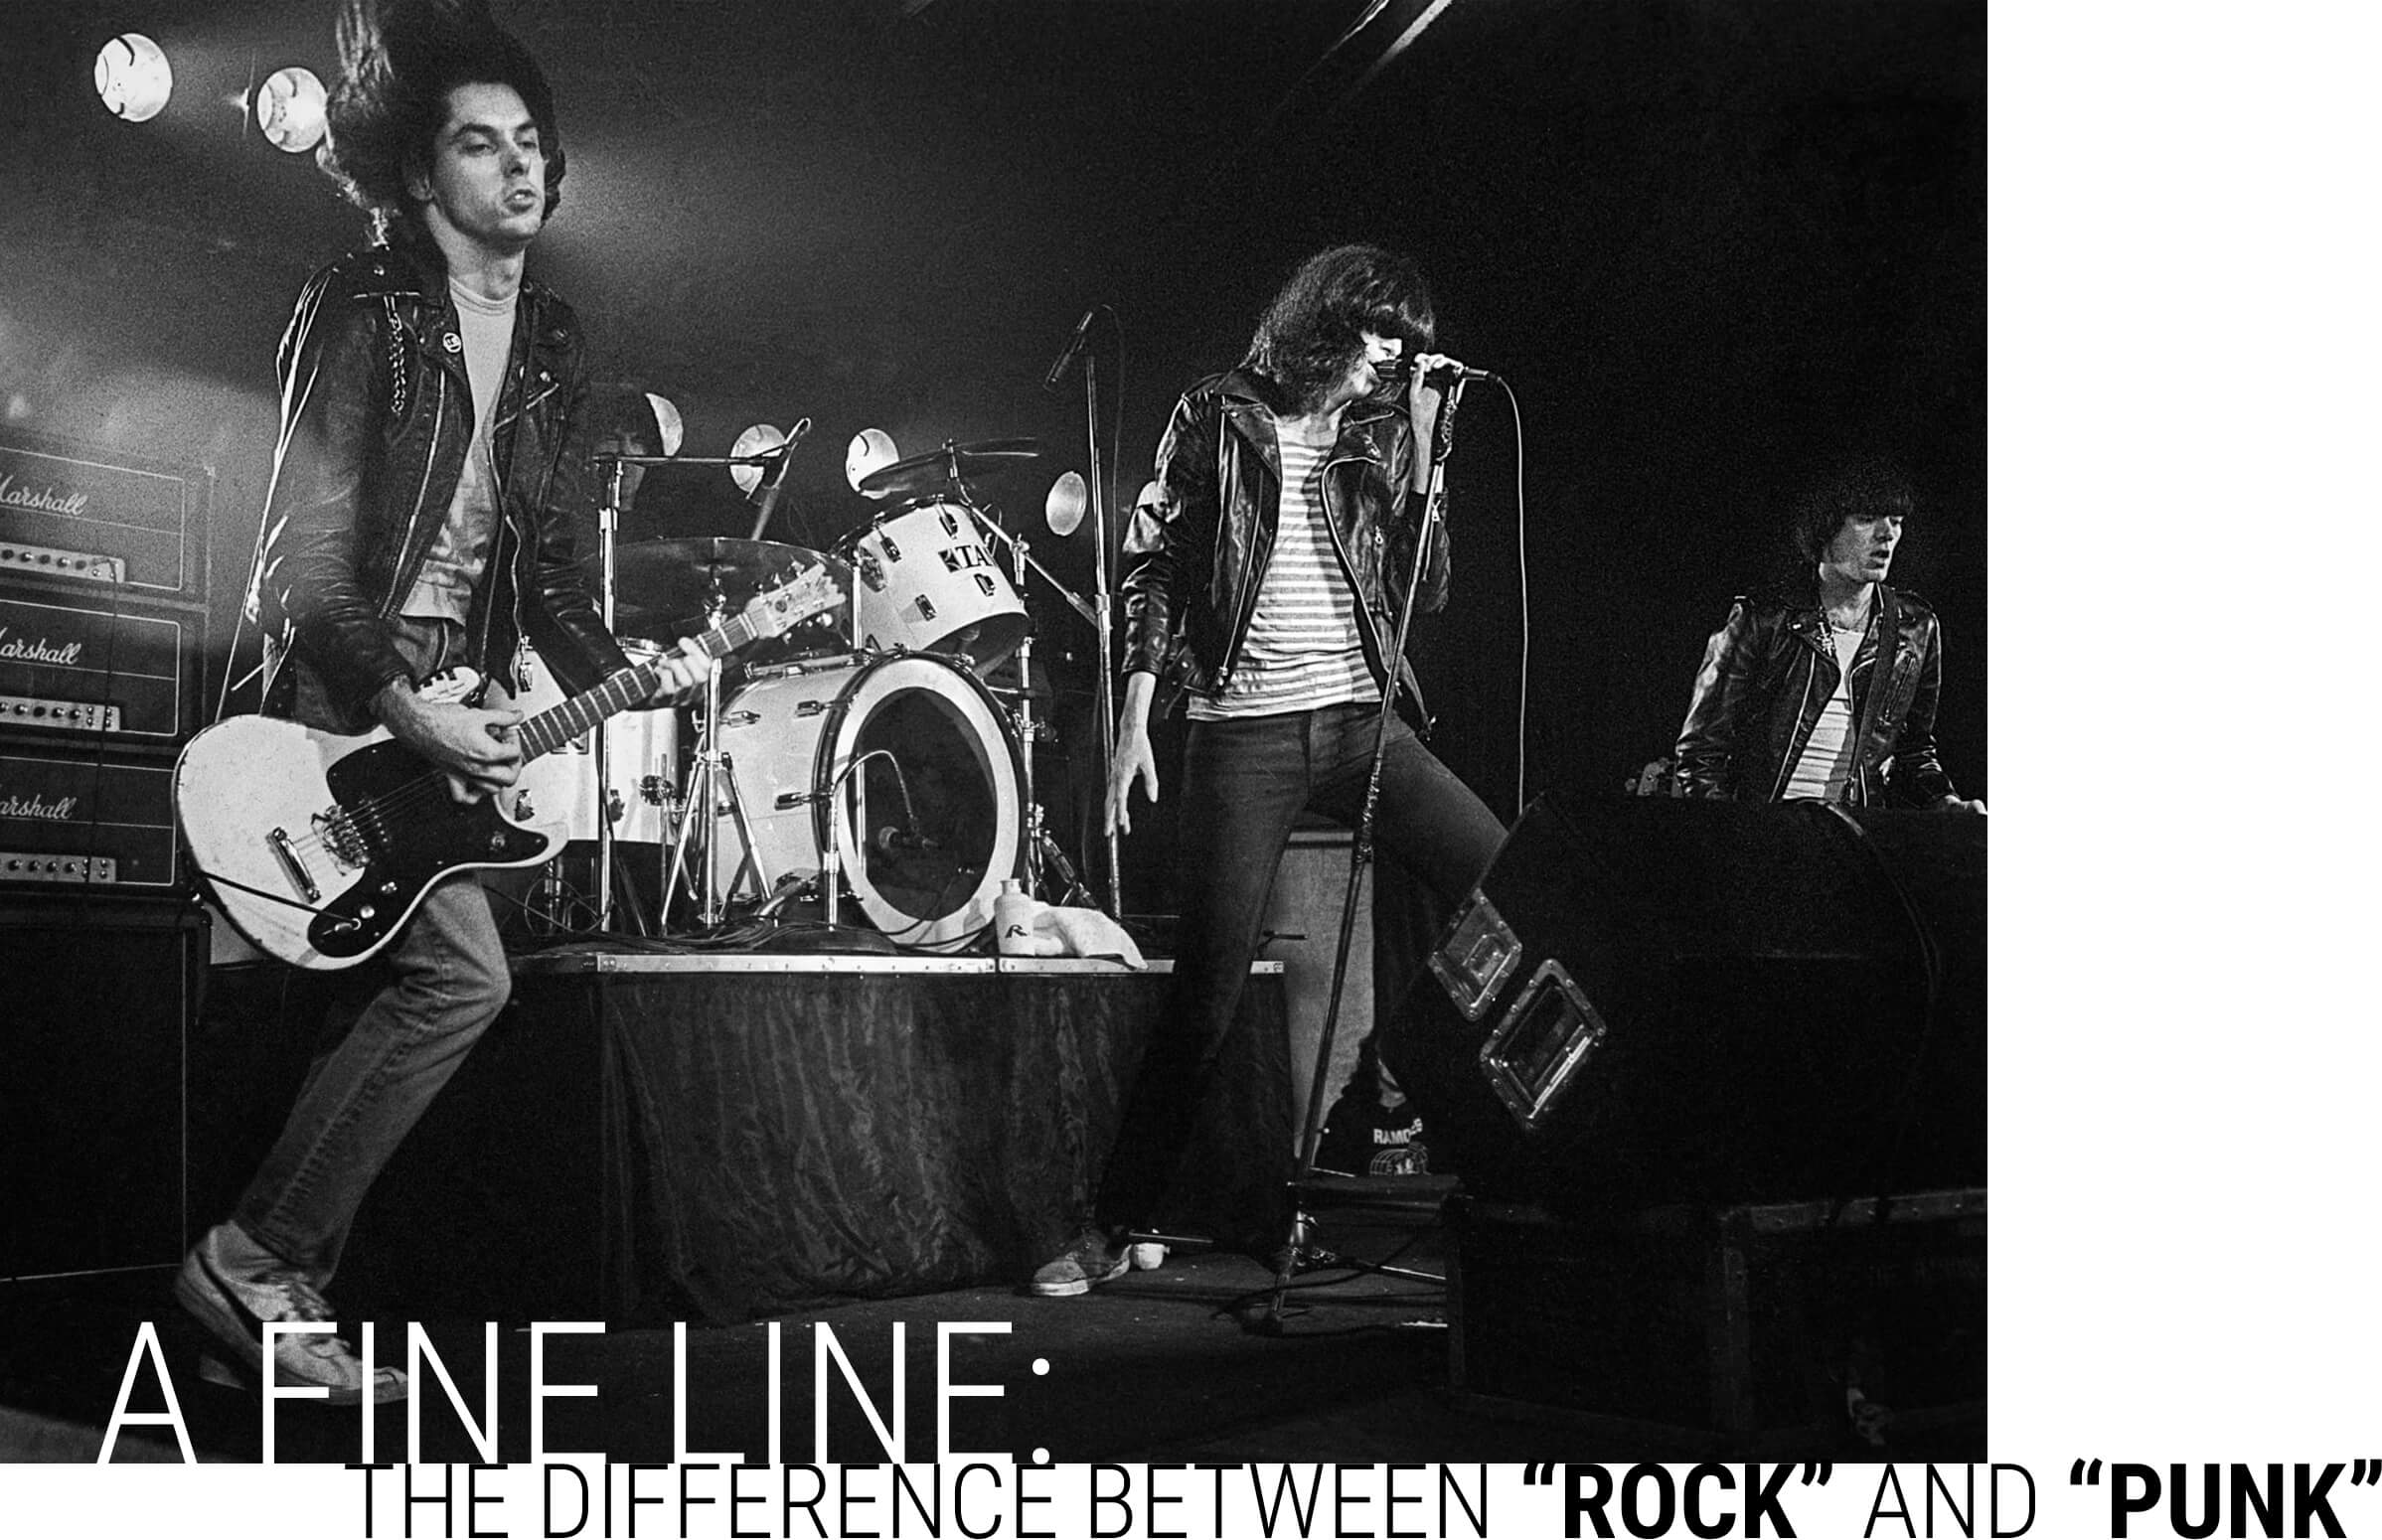 A Fine Line: The Difference Between “Rock” and “Punk” » Days of Punk